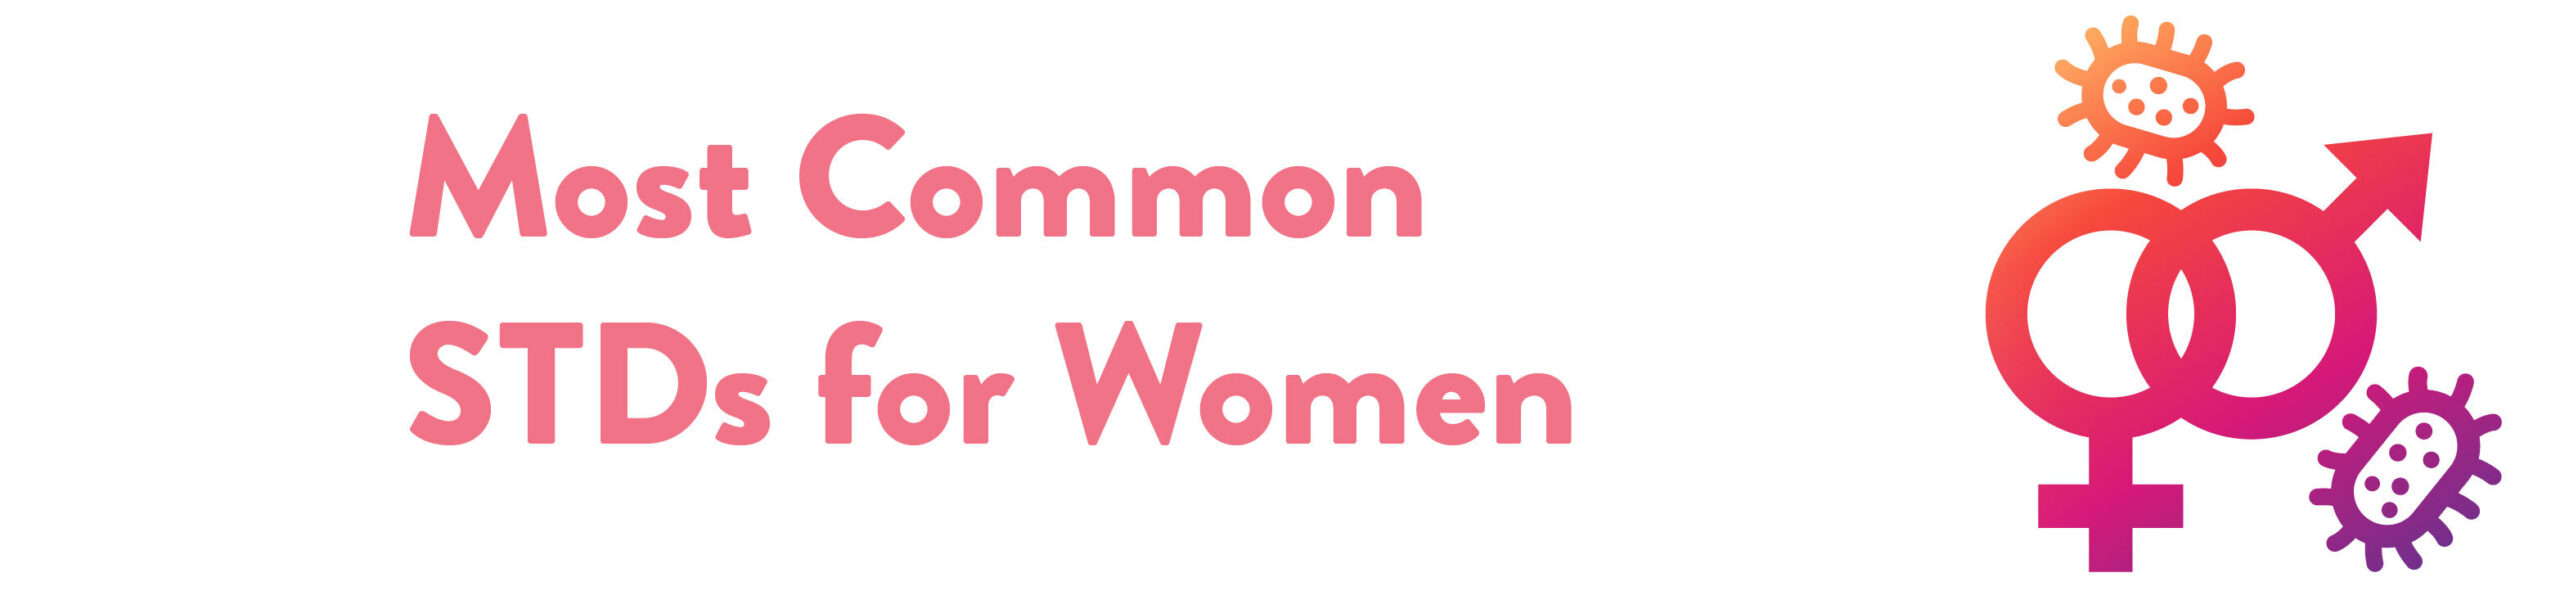 Most common STDs for Women Banner